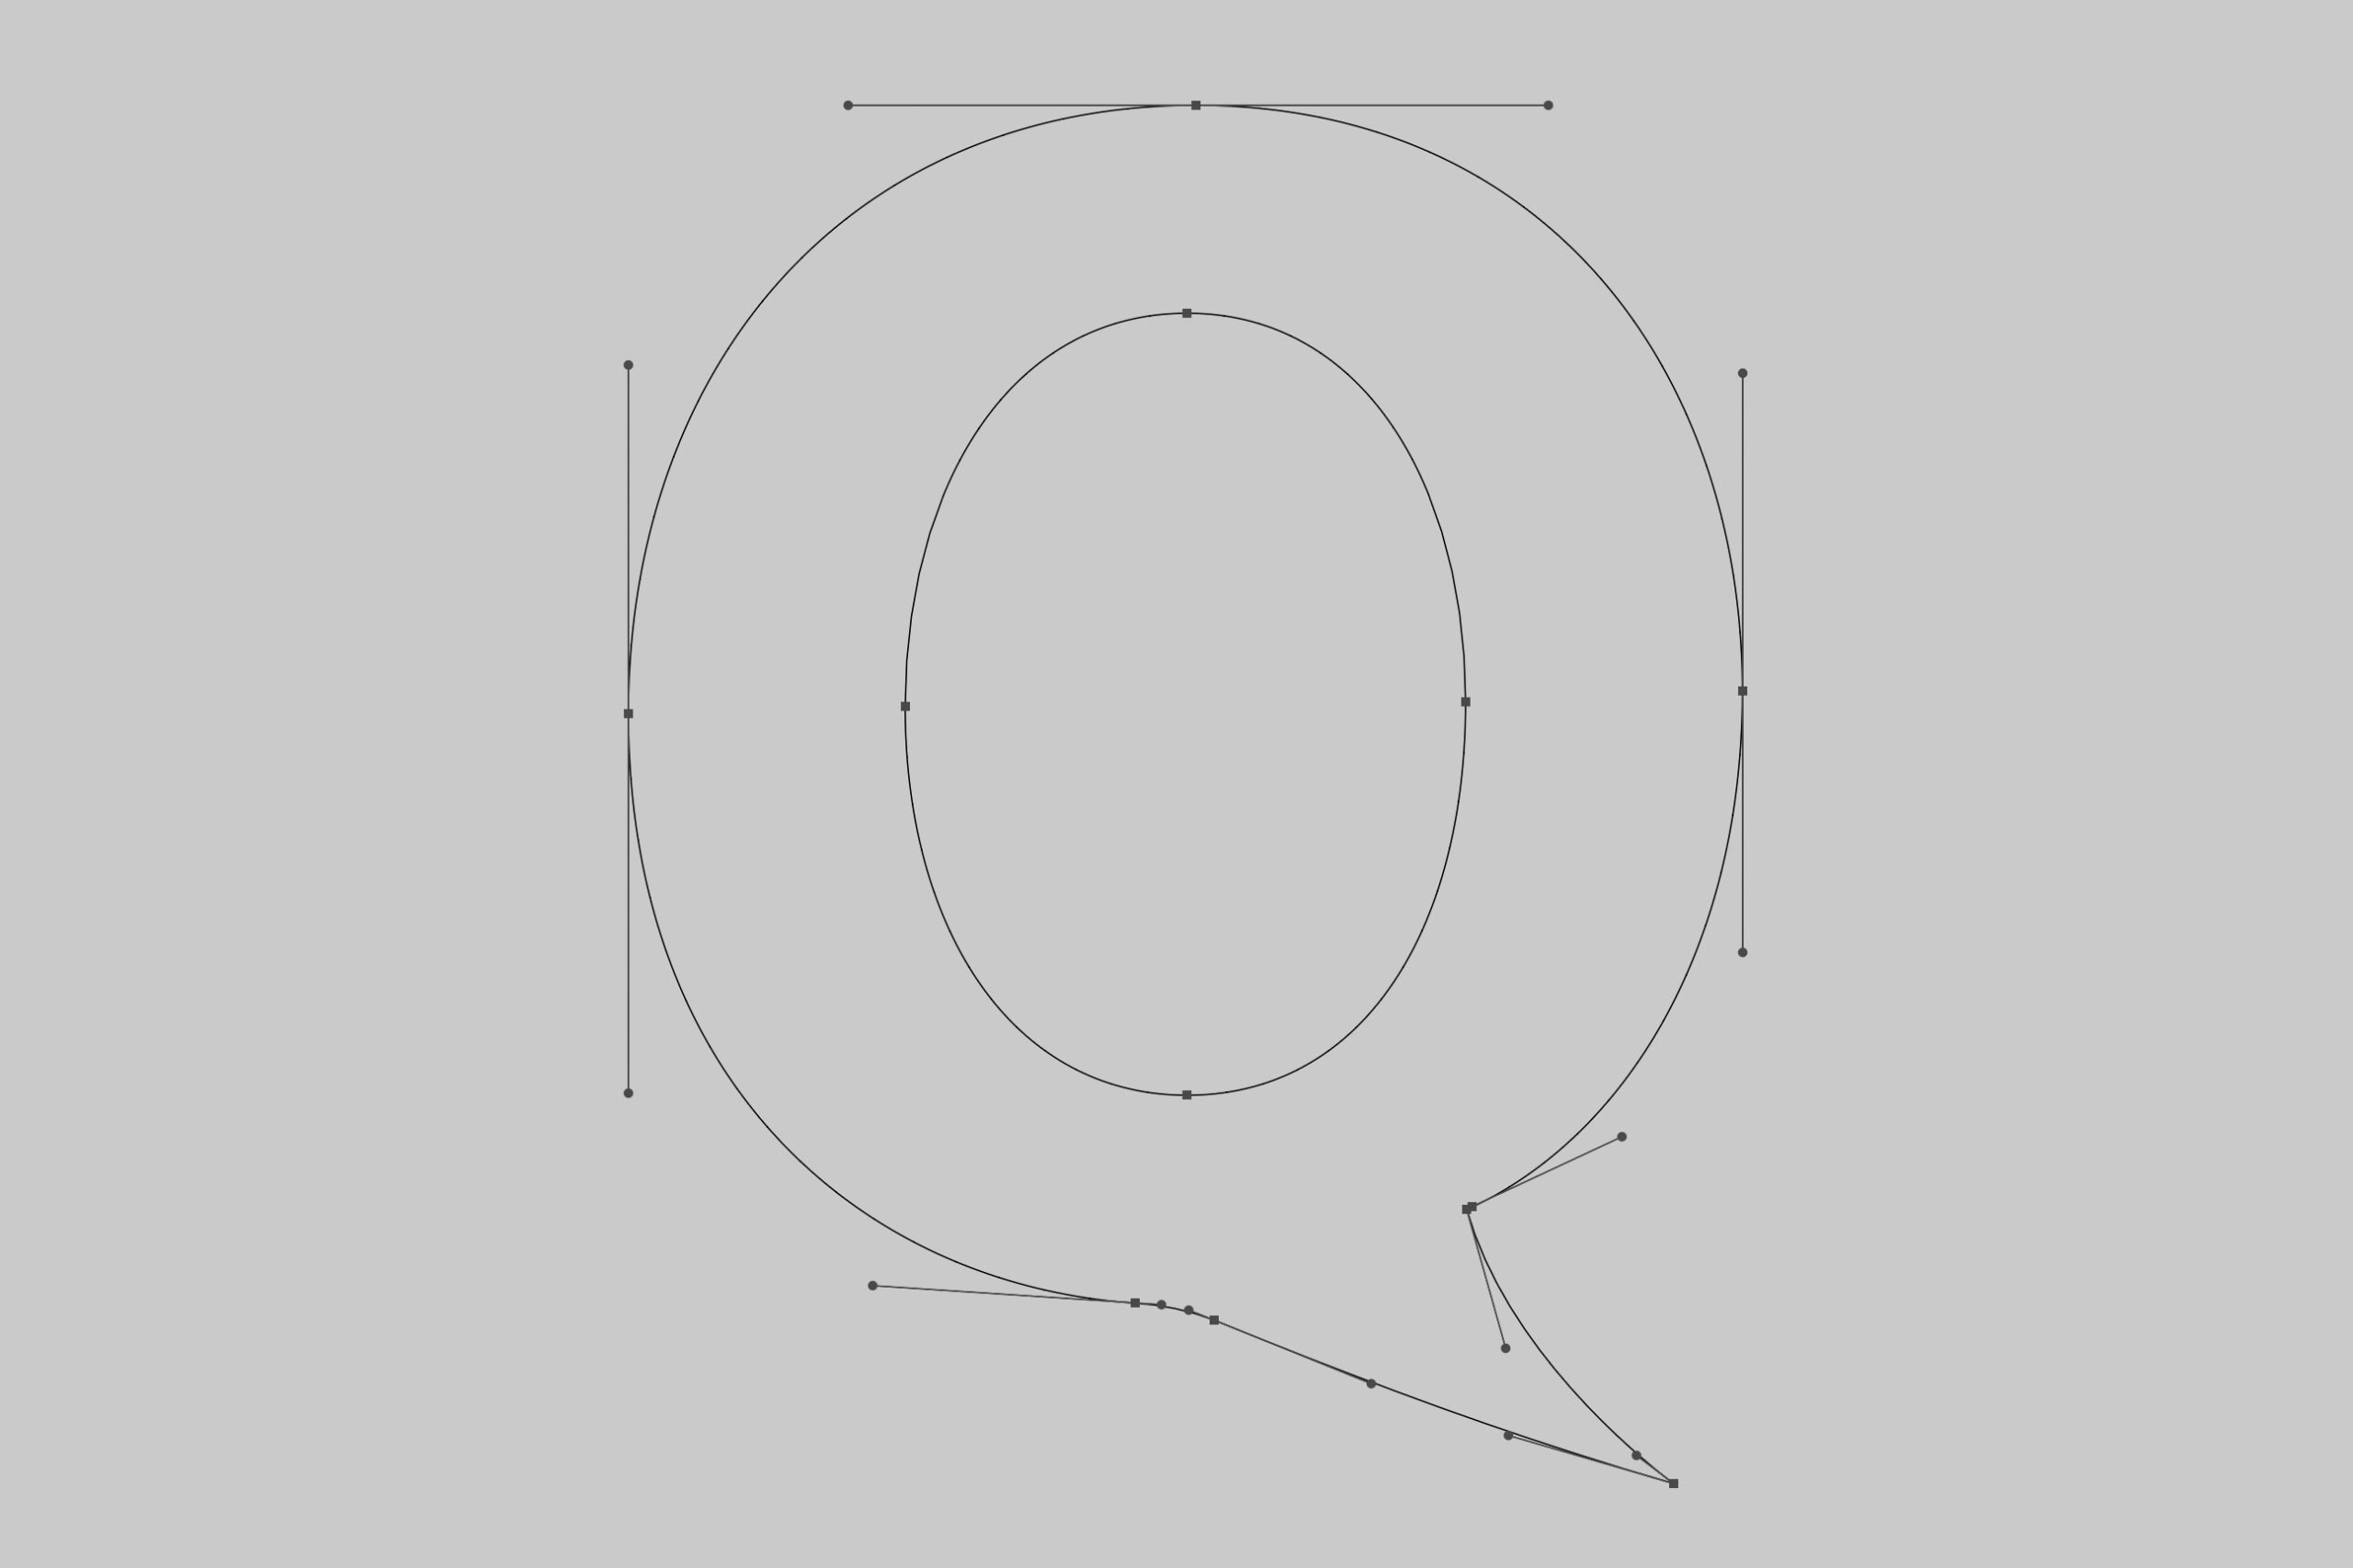 A wireframe image of the customised 'Q' letterform developed for the new brand. The tail of the upper-case 'Q' has been redrawn to form a hook-shape, reminiscent of a cartoon speech bubble.